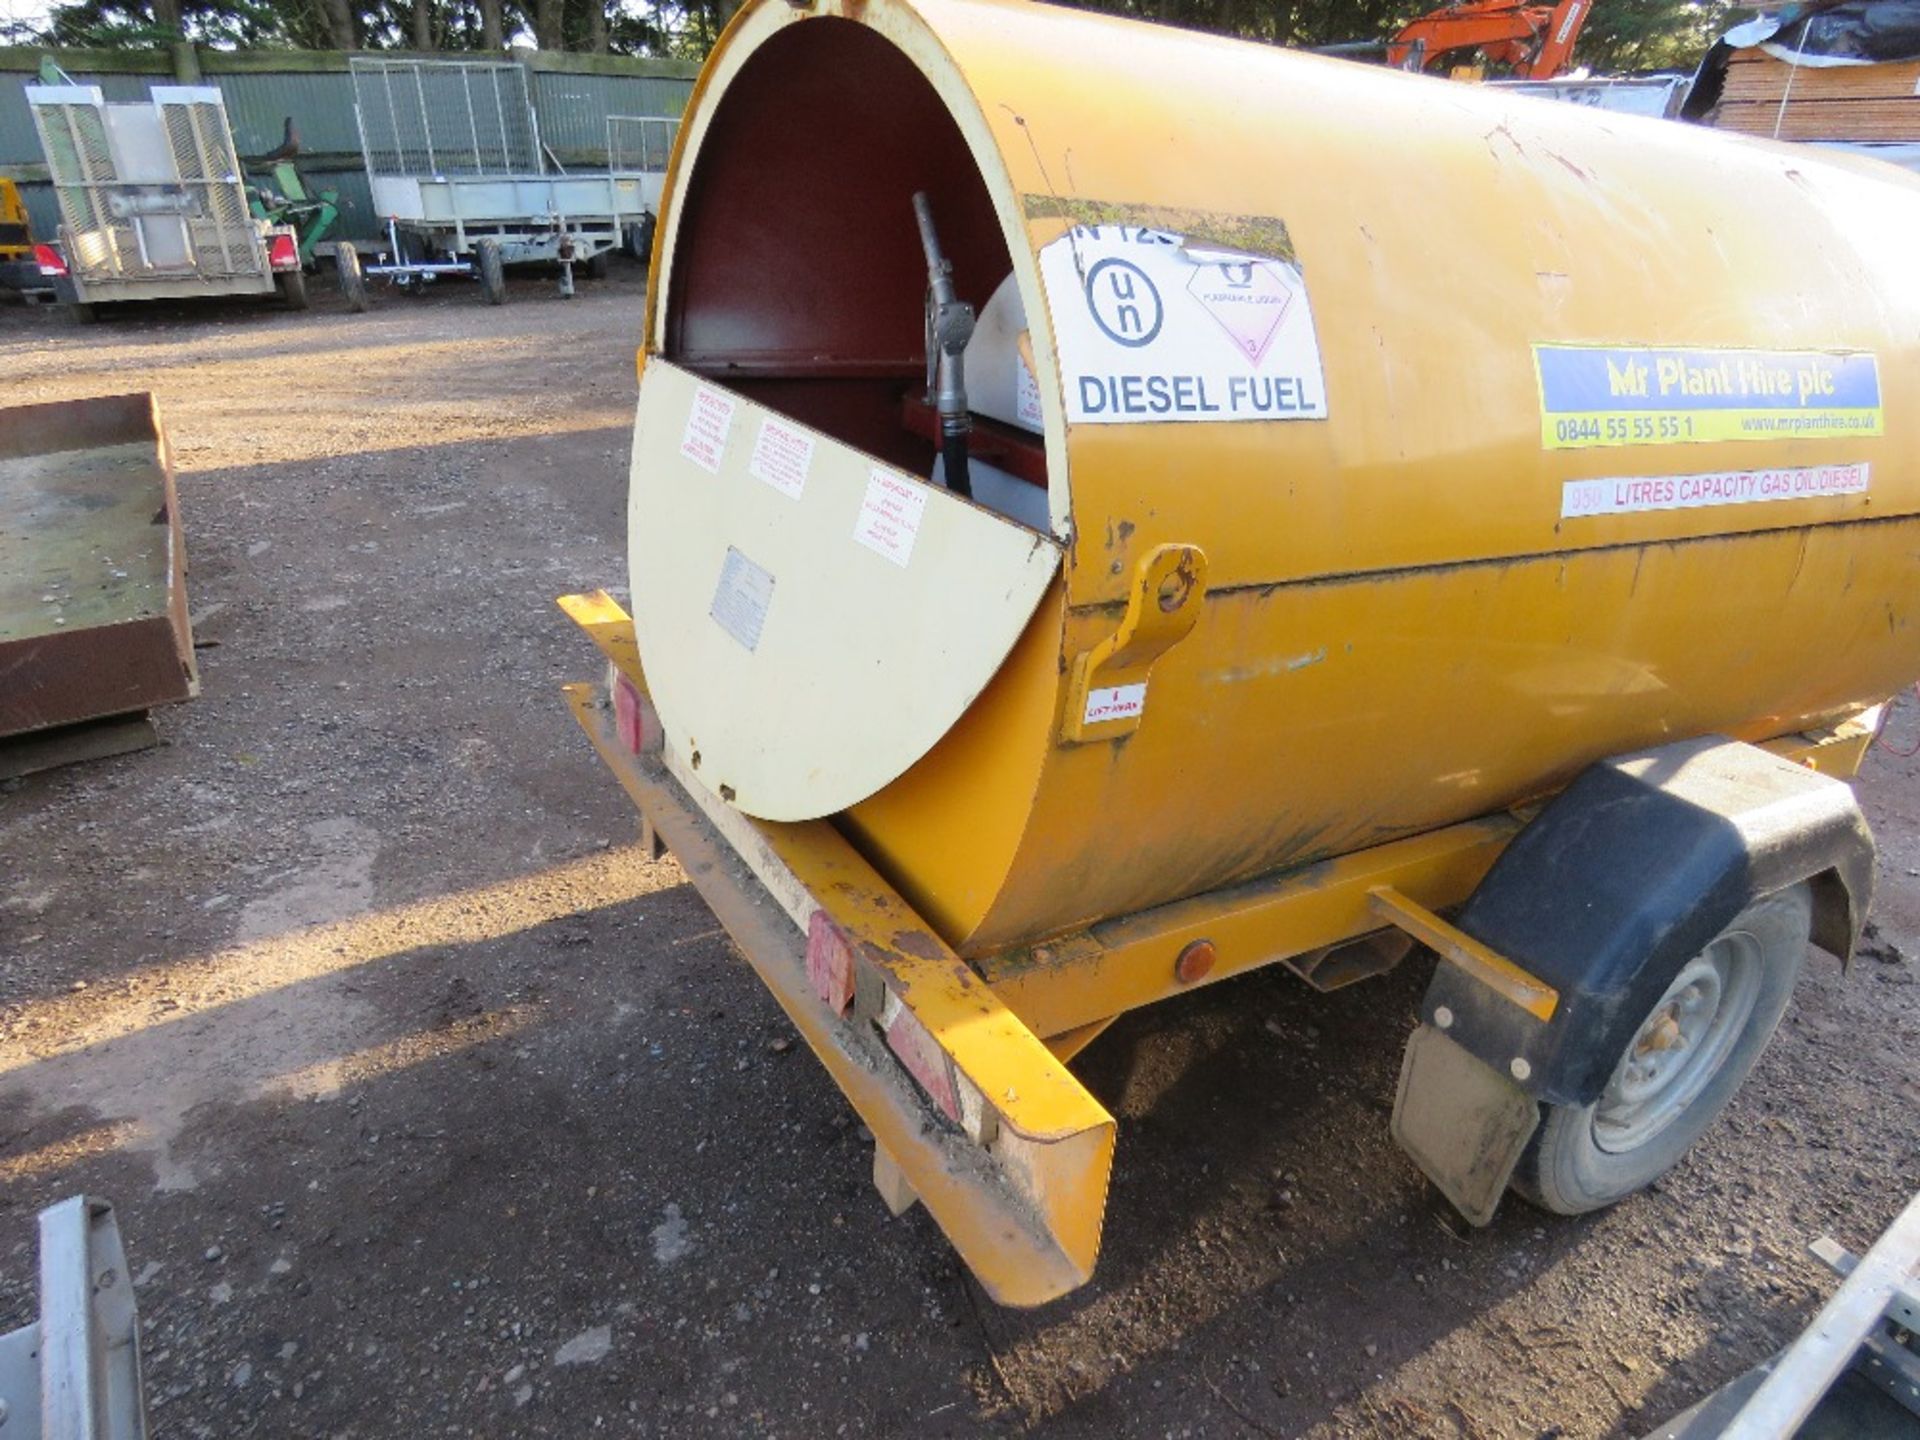 TRAILER ENGINEERING 950 LITRE DIESEL BOWSER, WITH PUMP AND HOSE. FAST TOW, RING HITCH FITTED. - Image 5 of 7